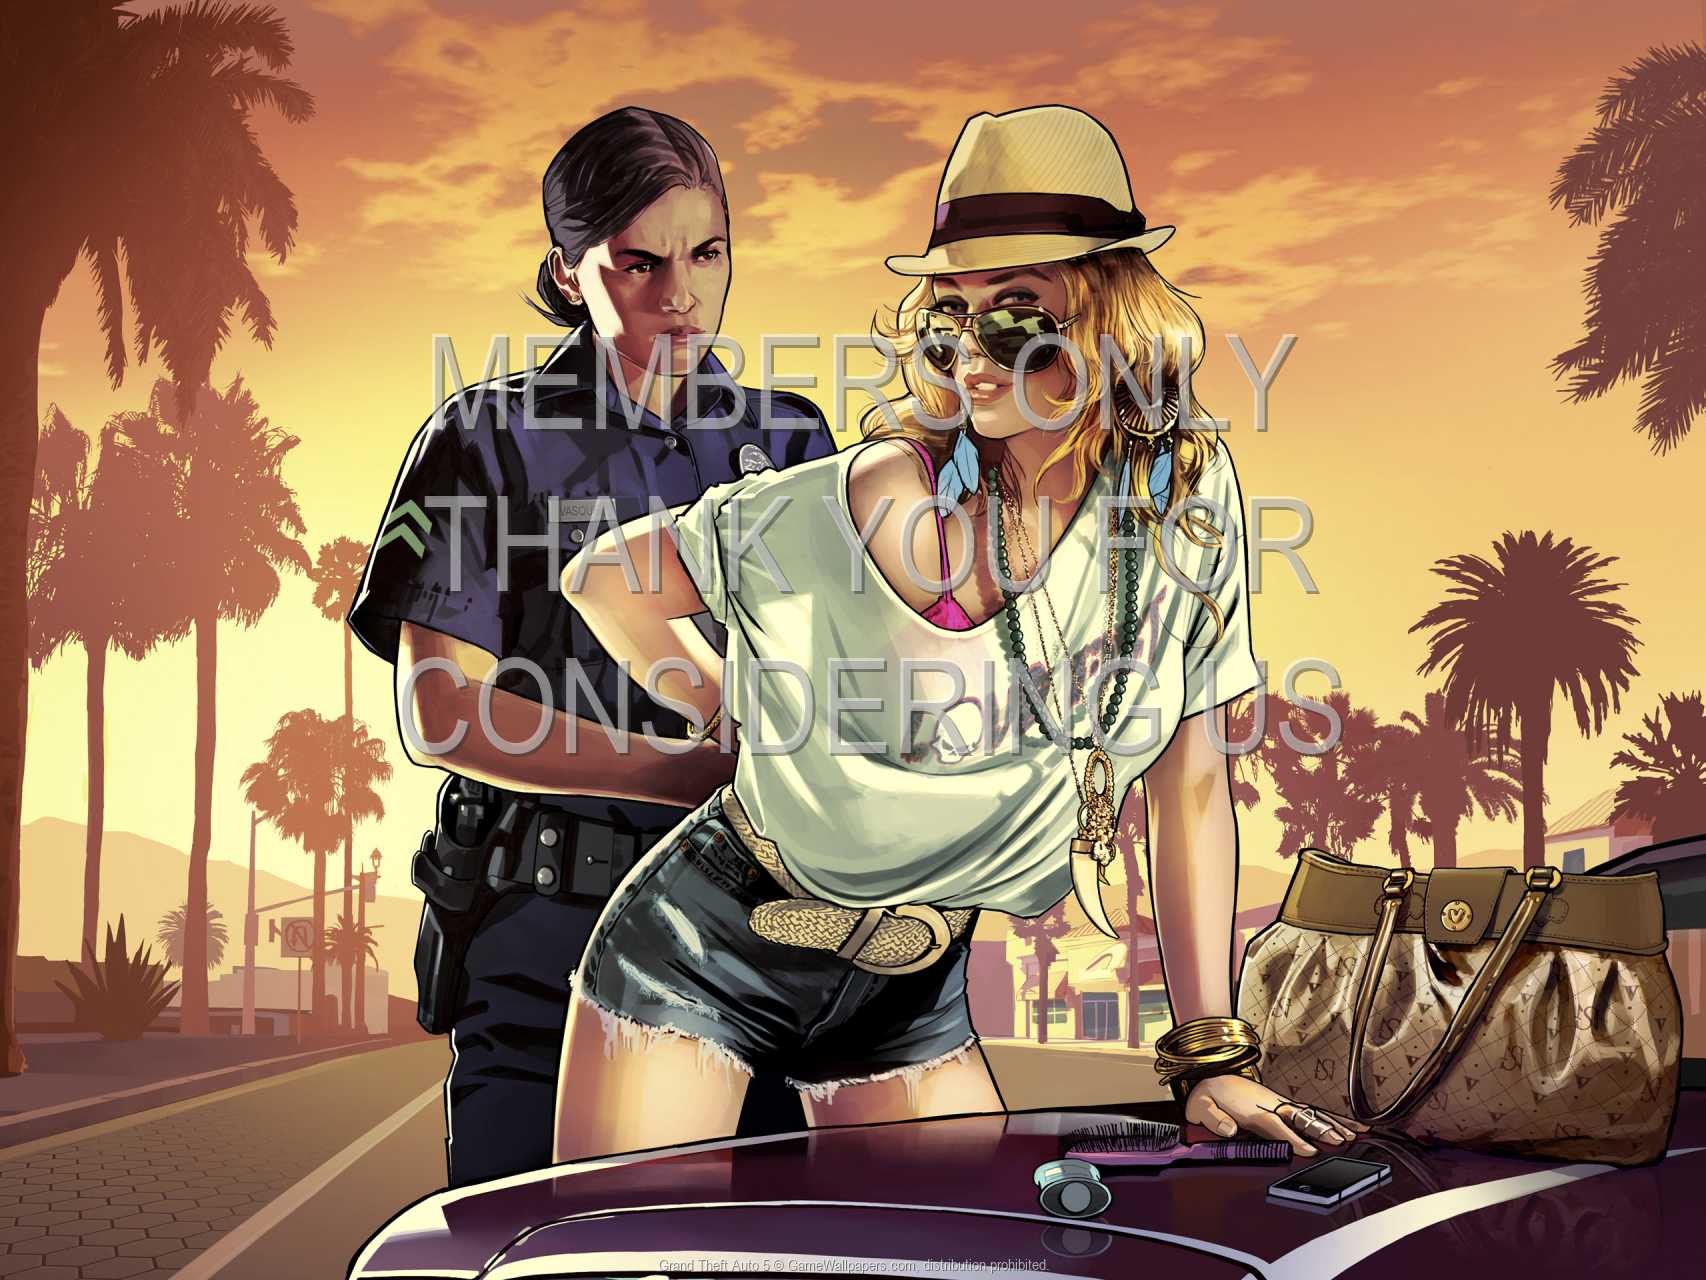 Grand Theft Auto 5 720p%20Horizontal Mobile wallpaper or background 02